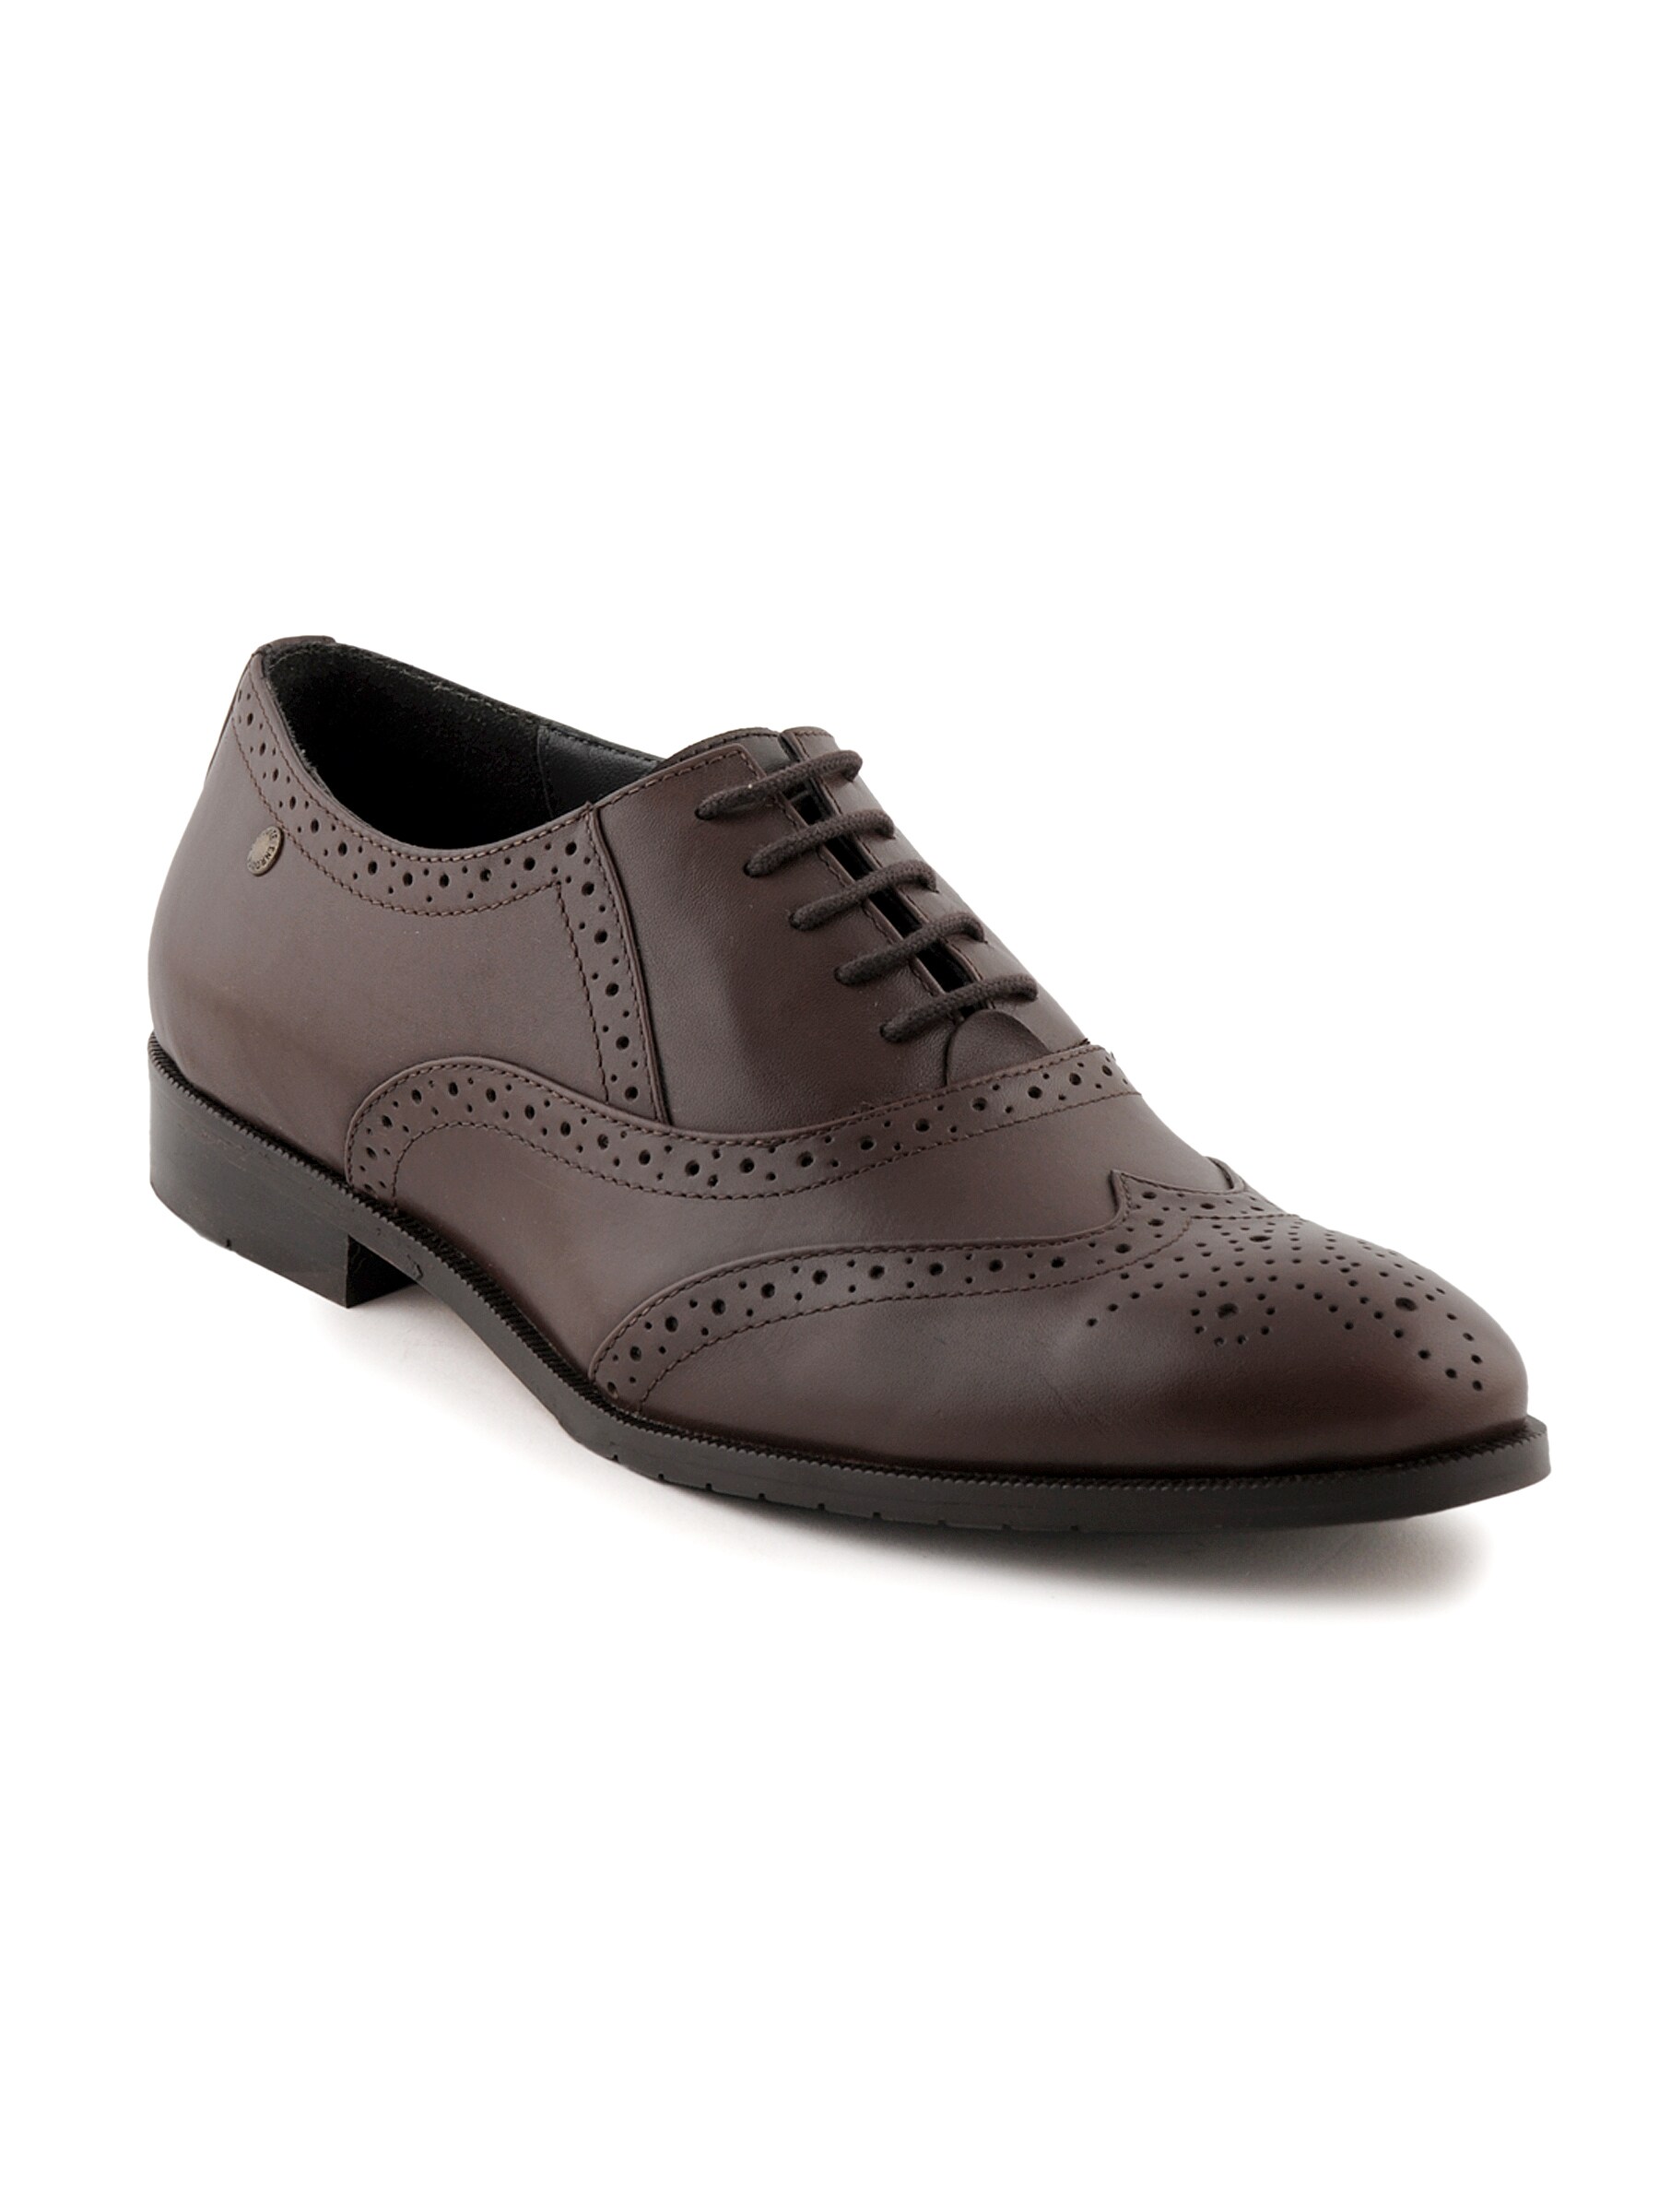 Enroute Men Leather Brown Formal Shoes